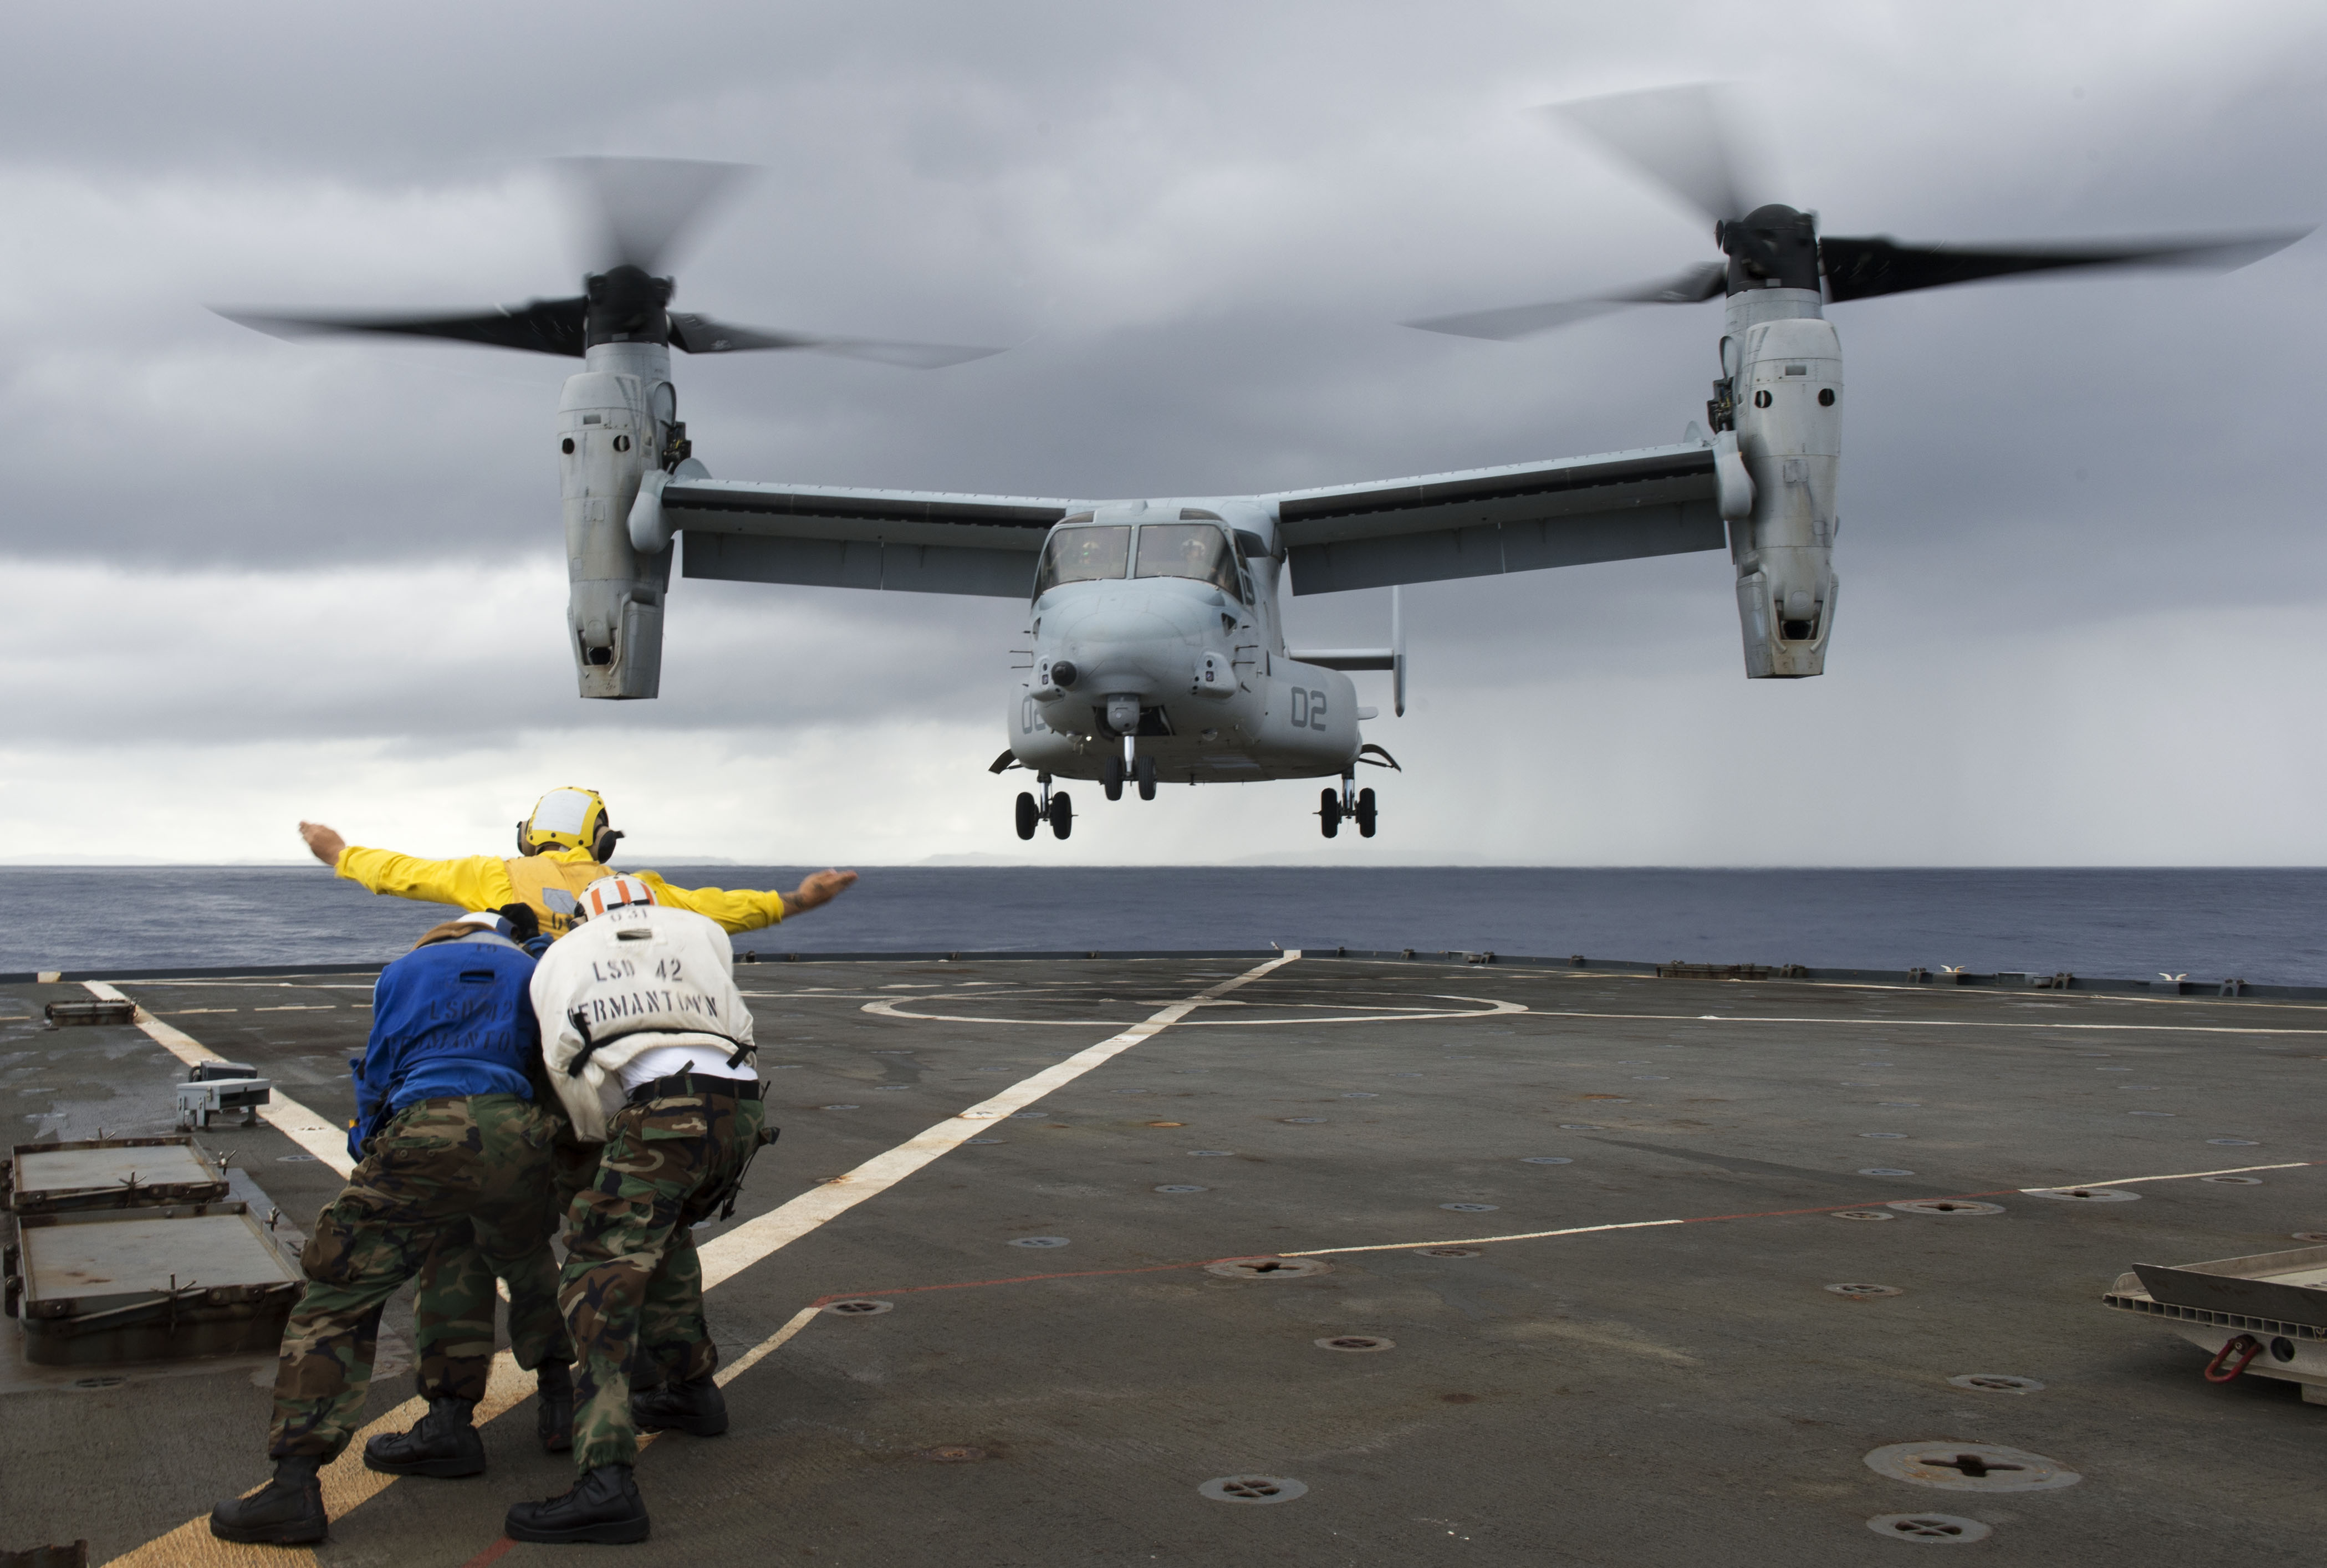 Sailors direct an MV-22 Osprey assigned to Marine Medium Tiltrotor Squadron (VMM) 265 as it lands on the flight deck of the amphibious dock landing ship USS Germantown (LSD 42) during exercise Blue Chromite off Okinawa in November 2014. US Navy photo.